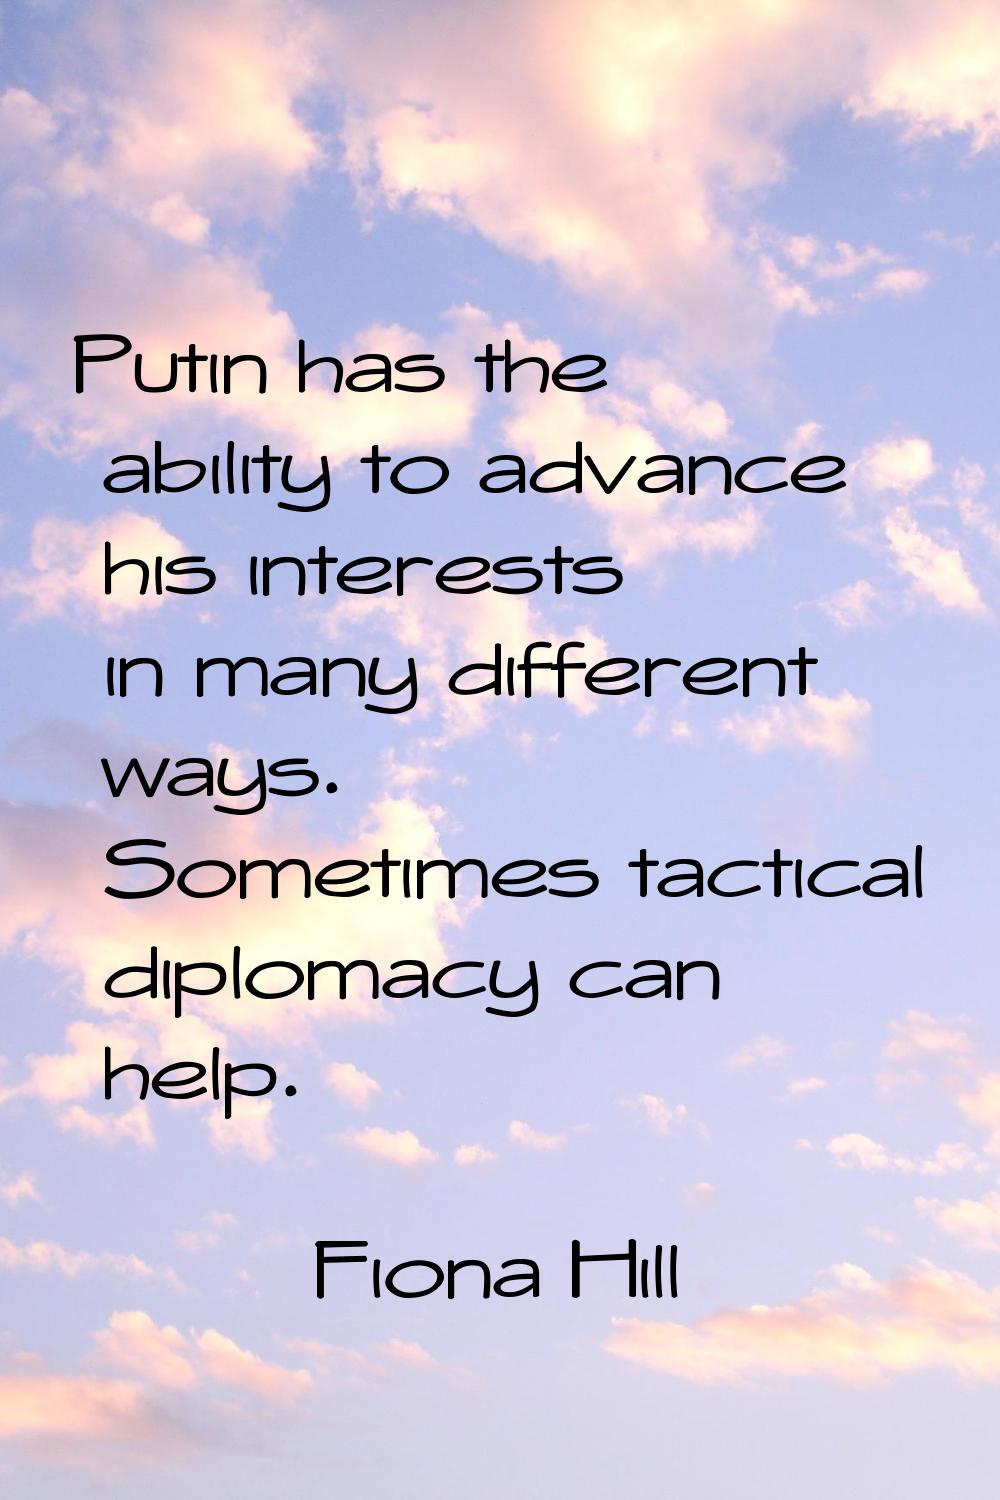 Putin has the ability to advance his interests in many different ways. Sometimes tactical diplomacy